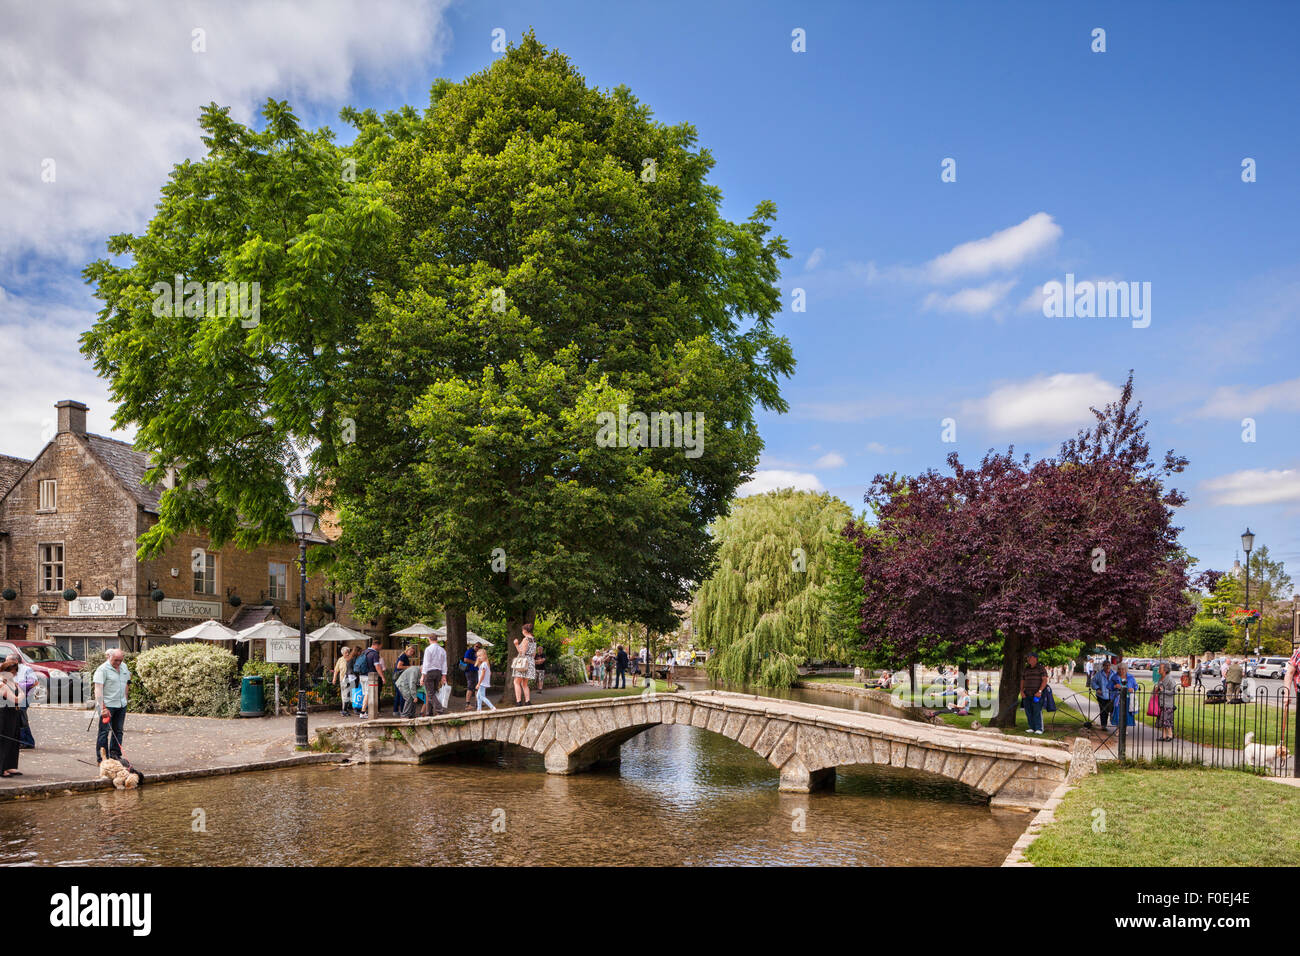 A summer afternoon in the Cotswold village of Bourton-on-the-Water, Gloucestershire, England. Stock Photo